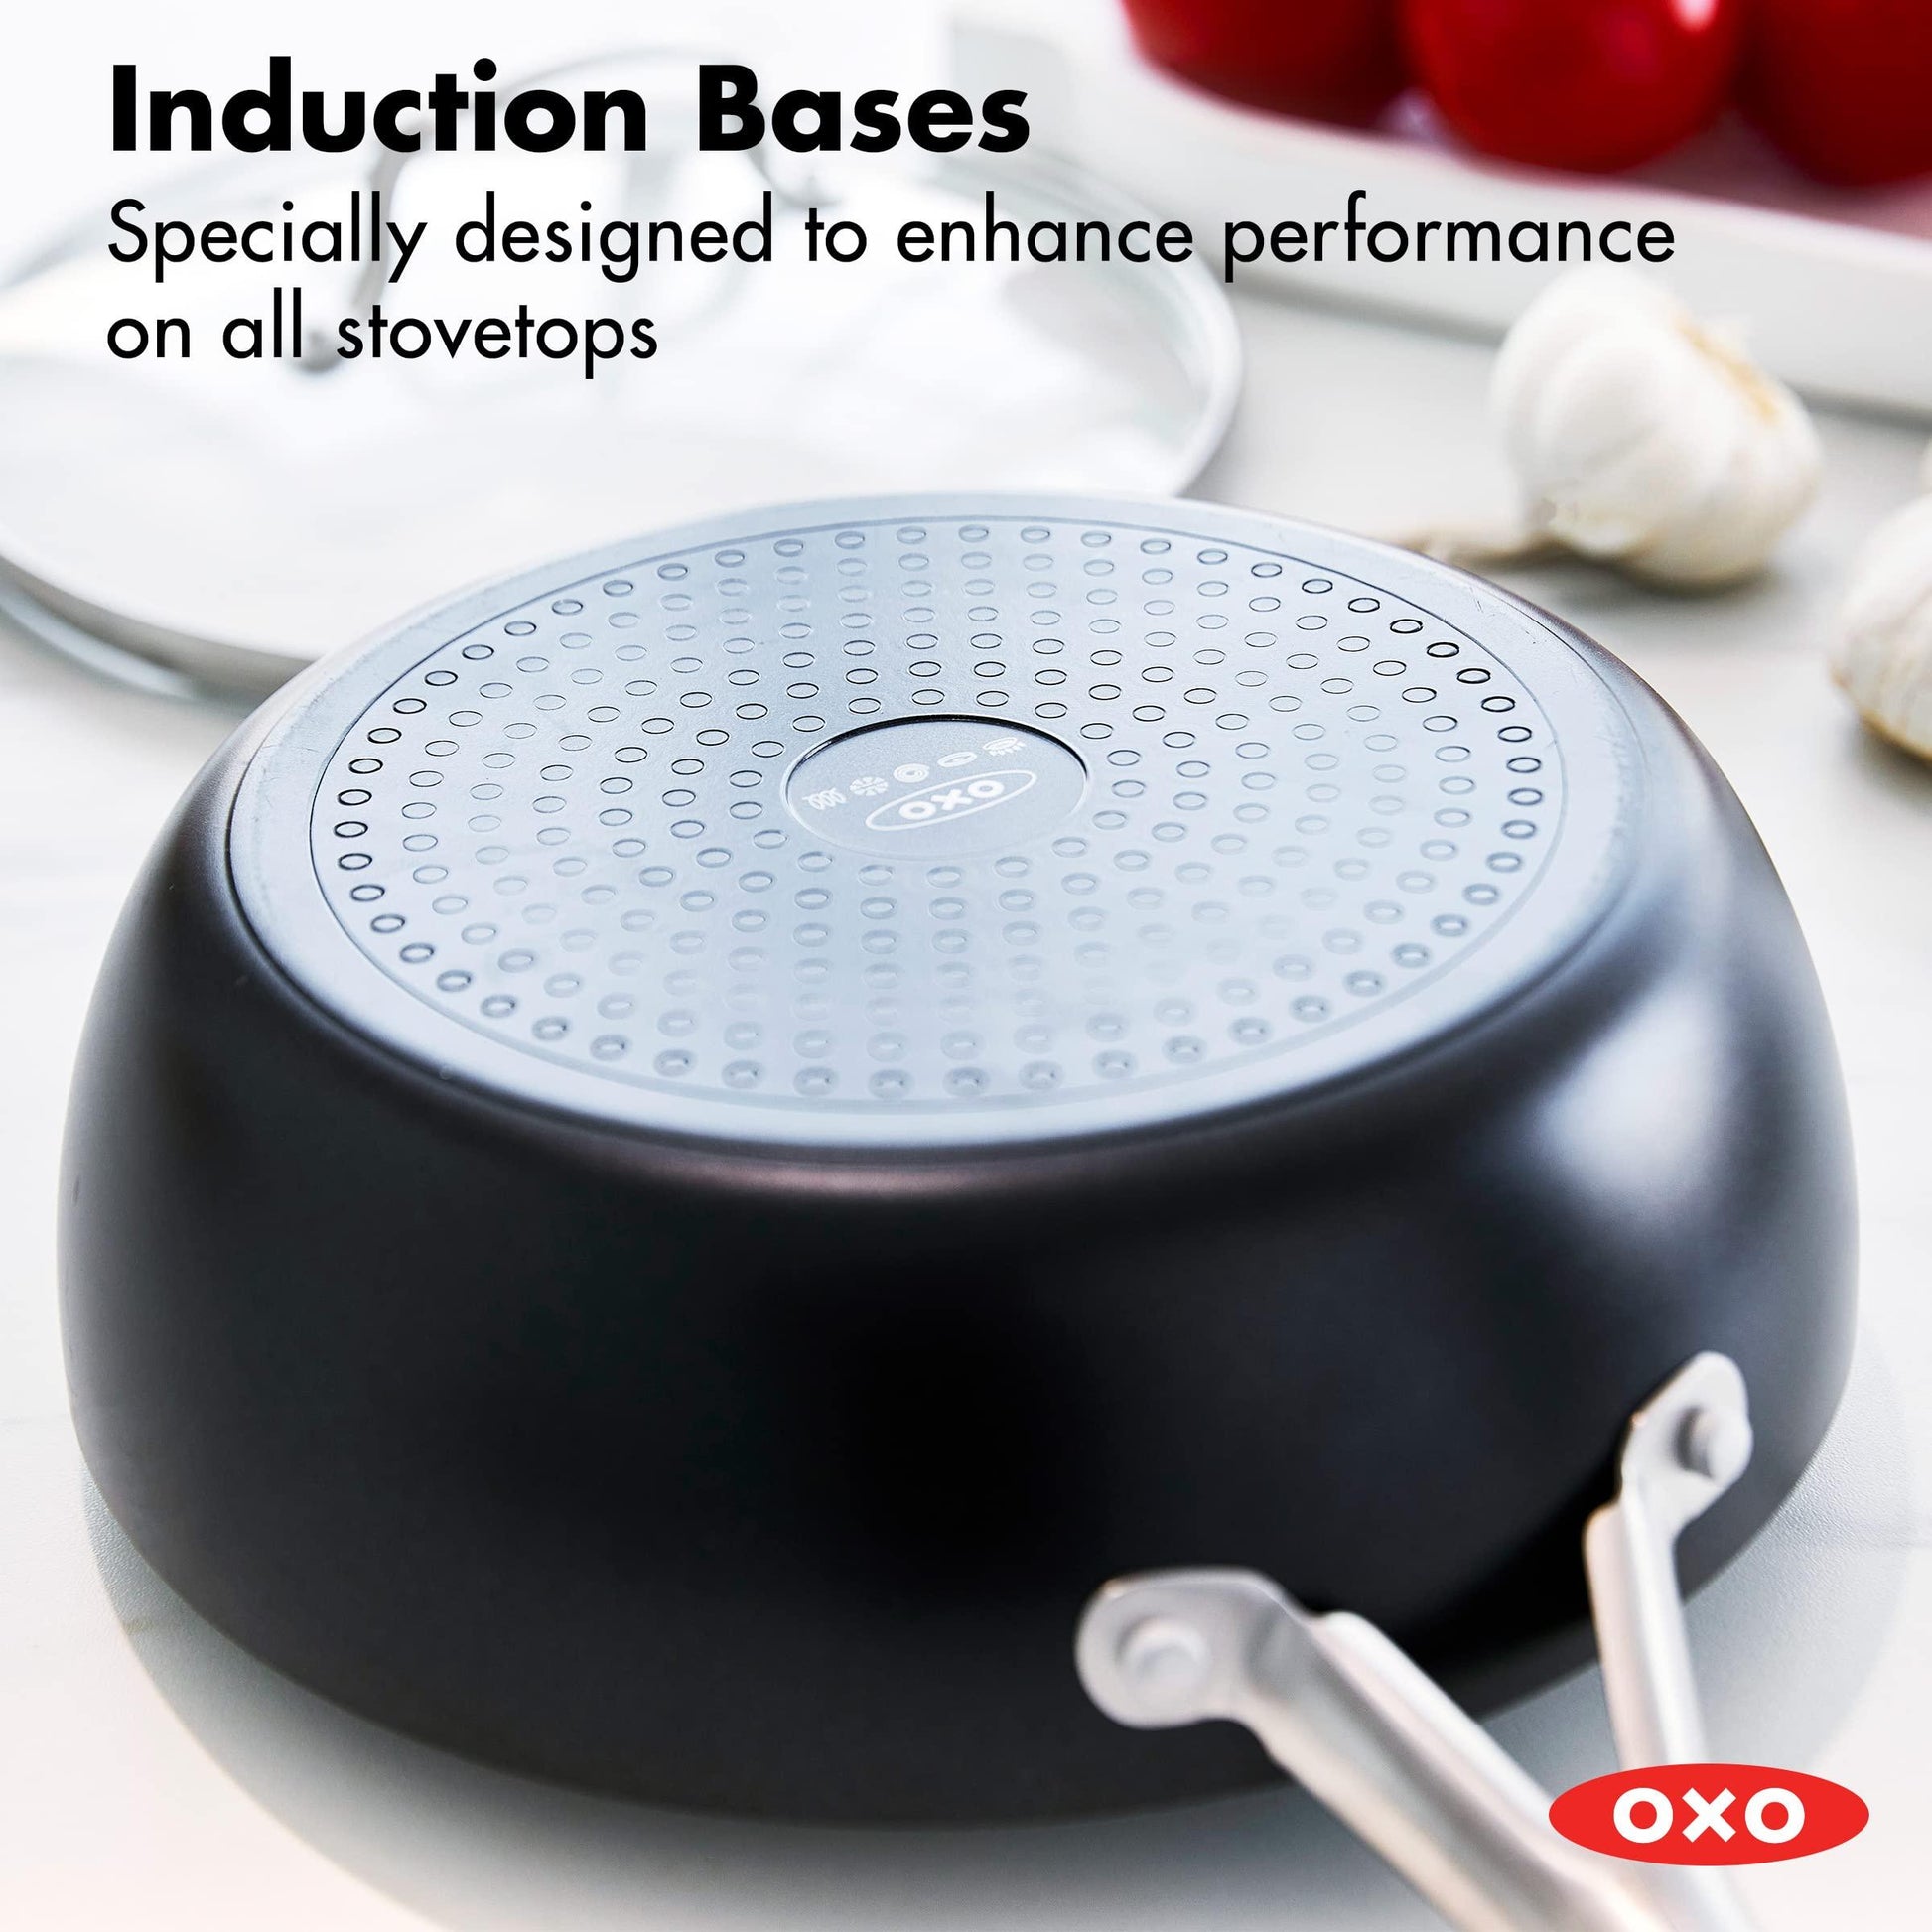 OXO Agility Series 3QT Chef’s Pan with Lid, PFAS-Free Nonstick Lightweight Aluminum, Induction Base, Quick Even Heating, Stainless Steel Handles, Chip-Free Rims, Dishwasher & Oven Safe, Black - CookCave